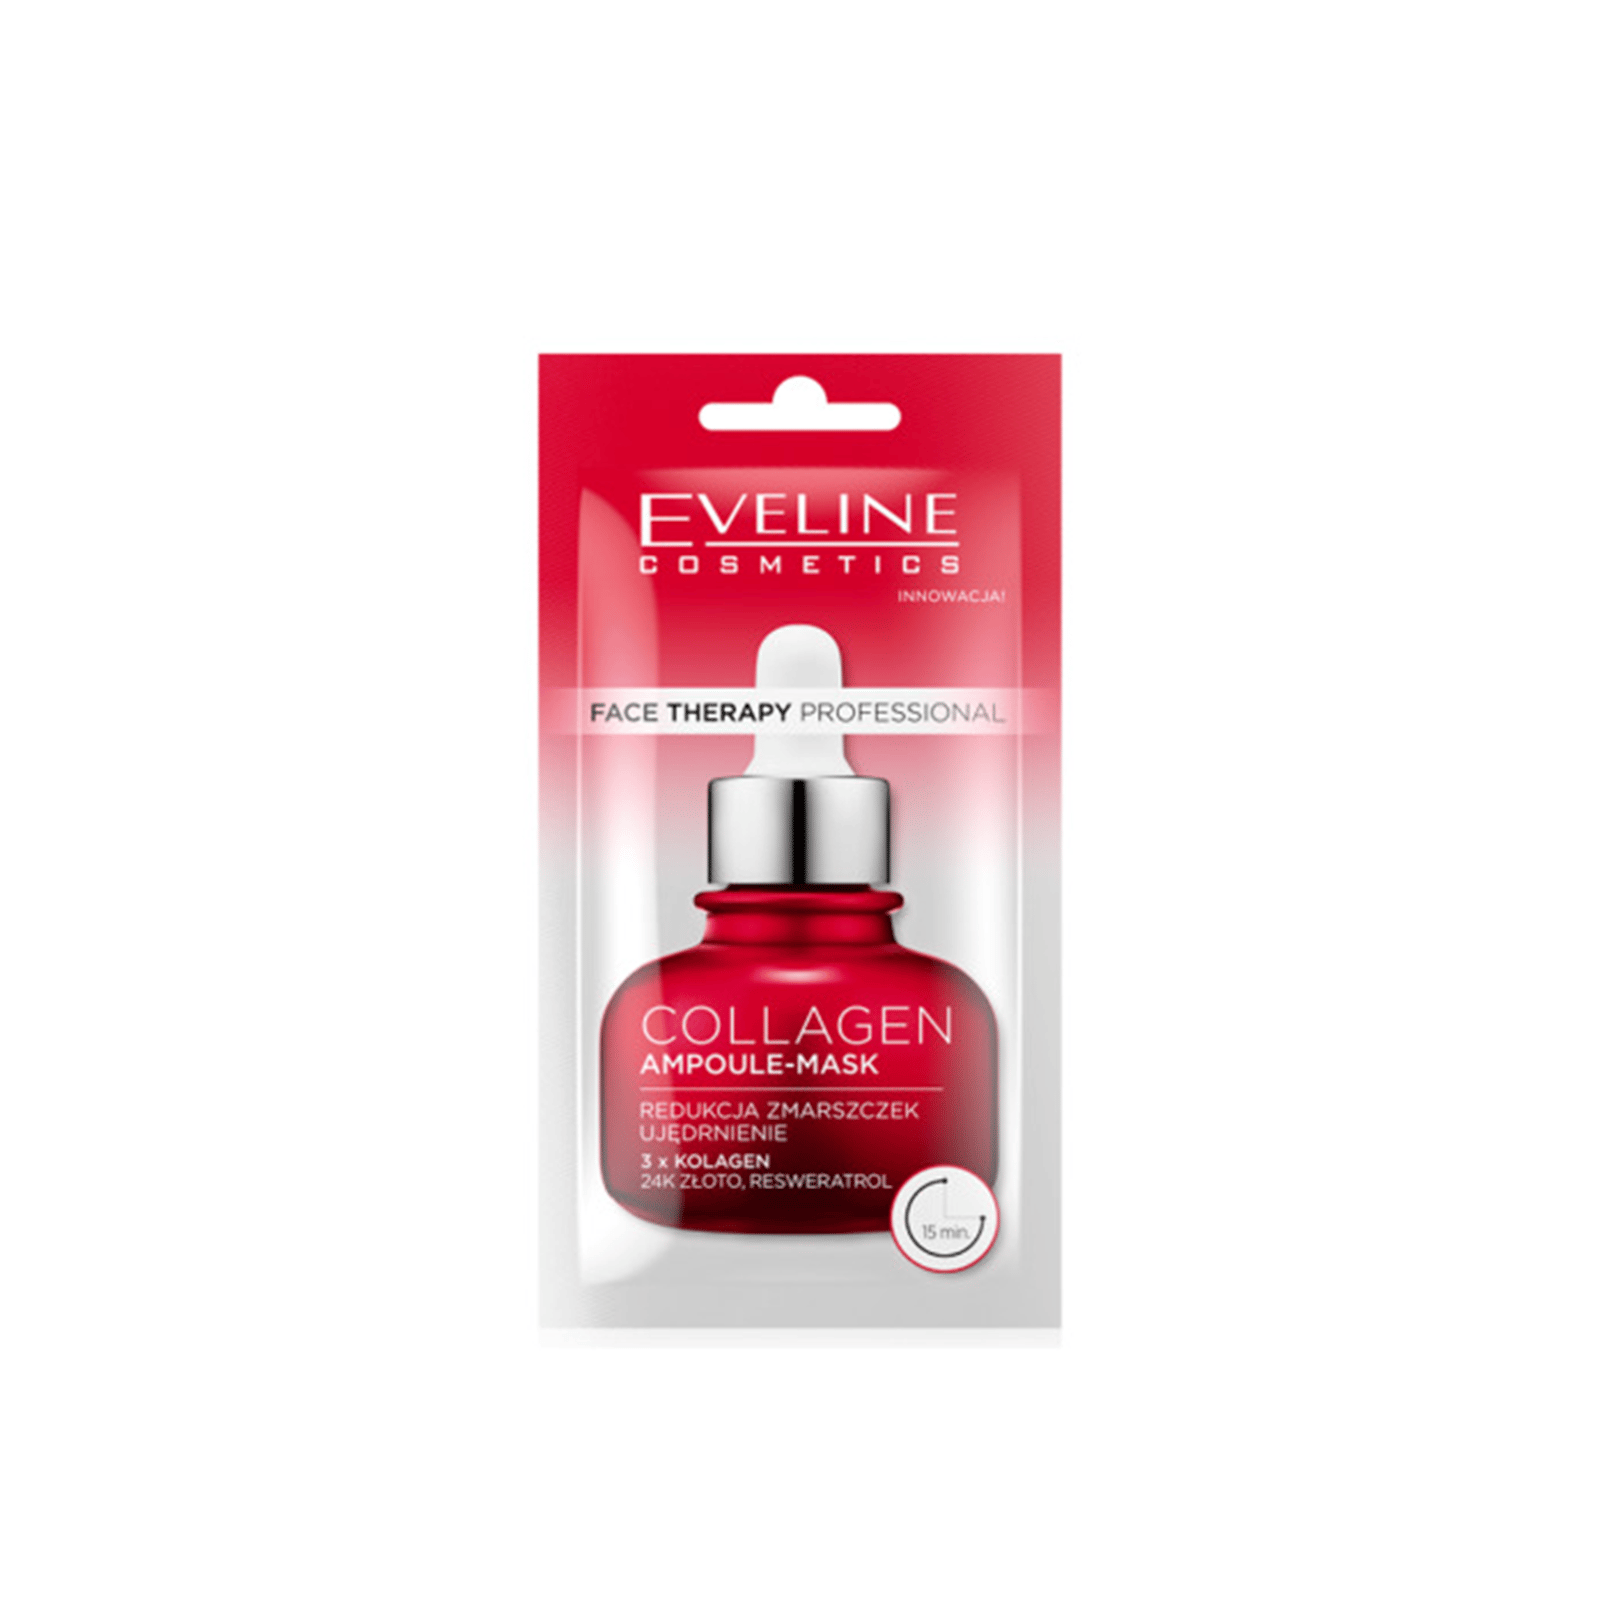 Eveline Cosmetics Face Therapy Collagen Ampoule-Mask 8ml